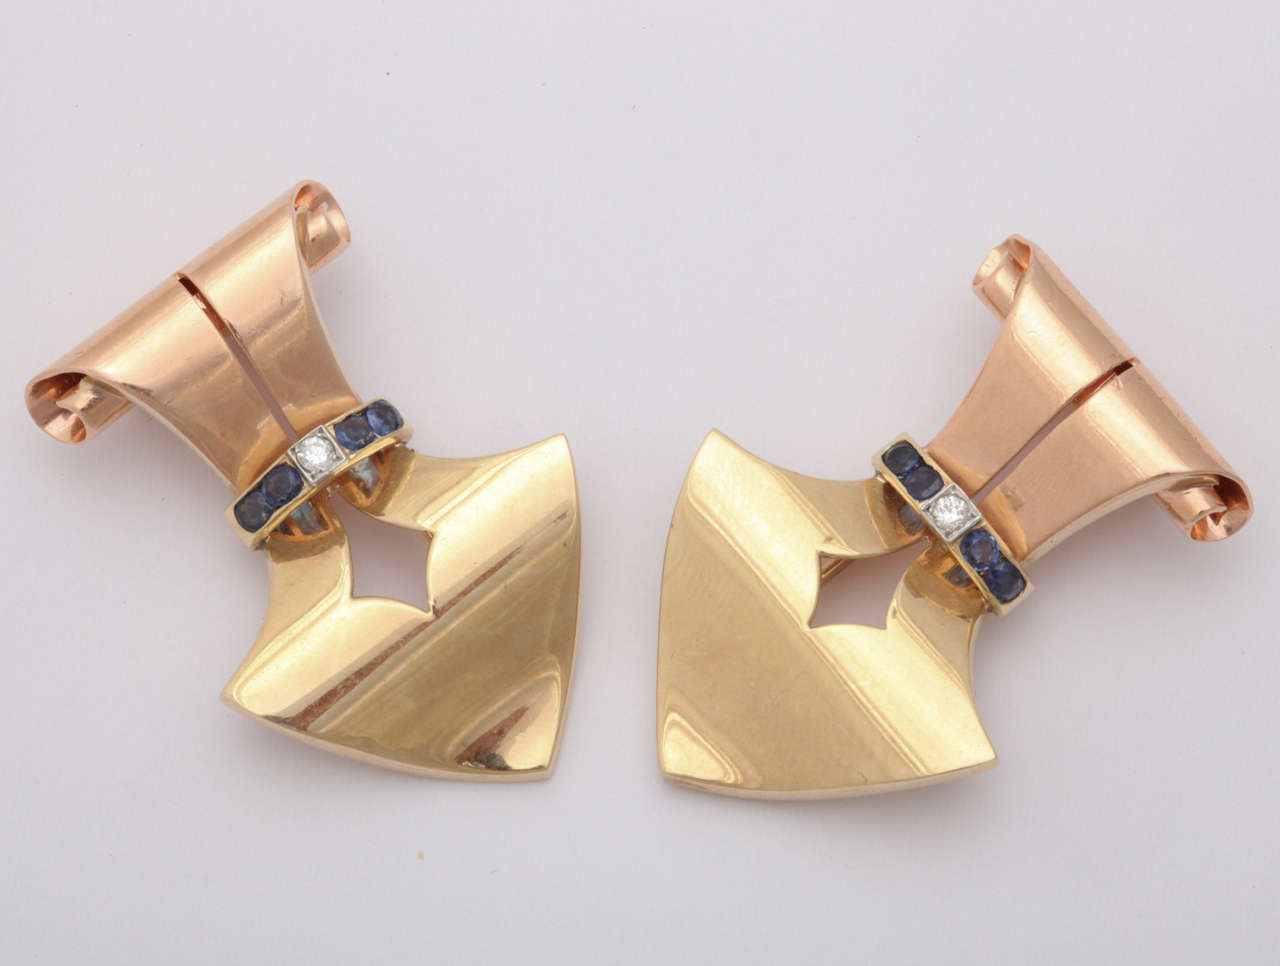 14k rose gold and yellow gold "arrowhead" shape dress clips 8 round sapphires and 2 round diamonds.

Matching design ear clips 4 round sapphire and 2 diamonds

Total weight 52.8 grams